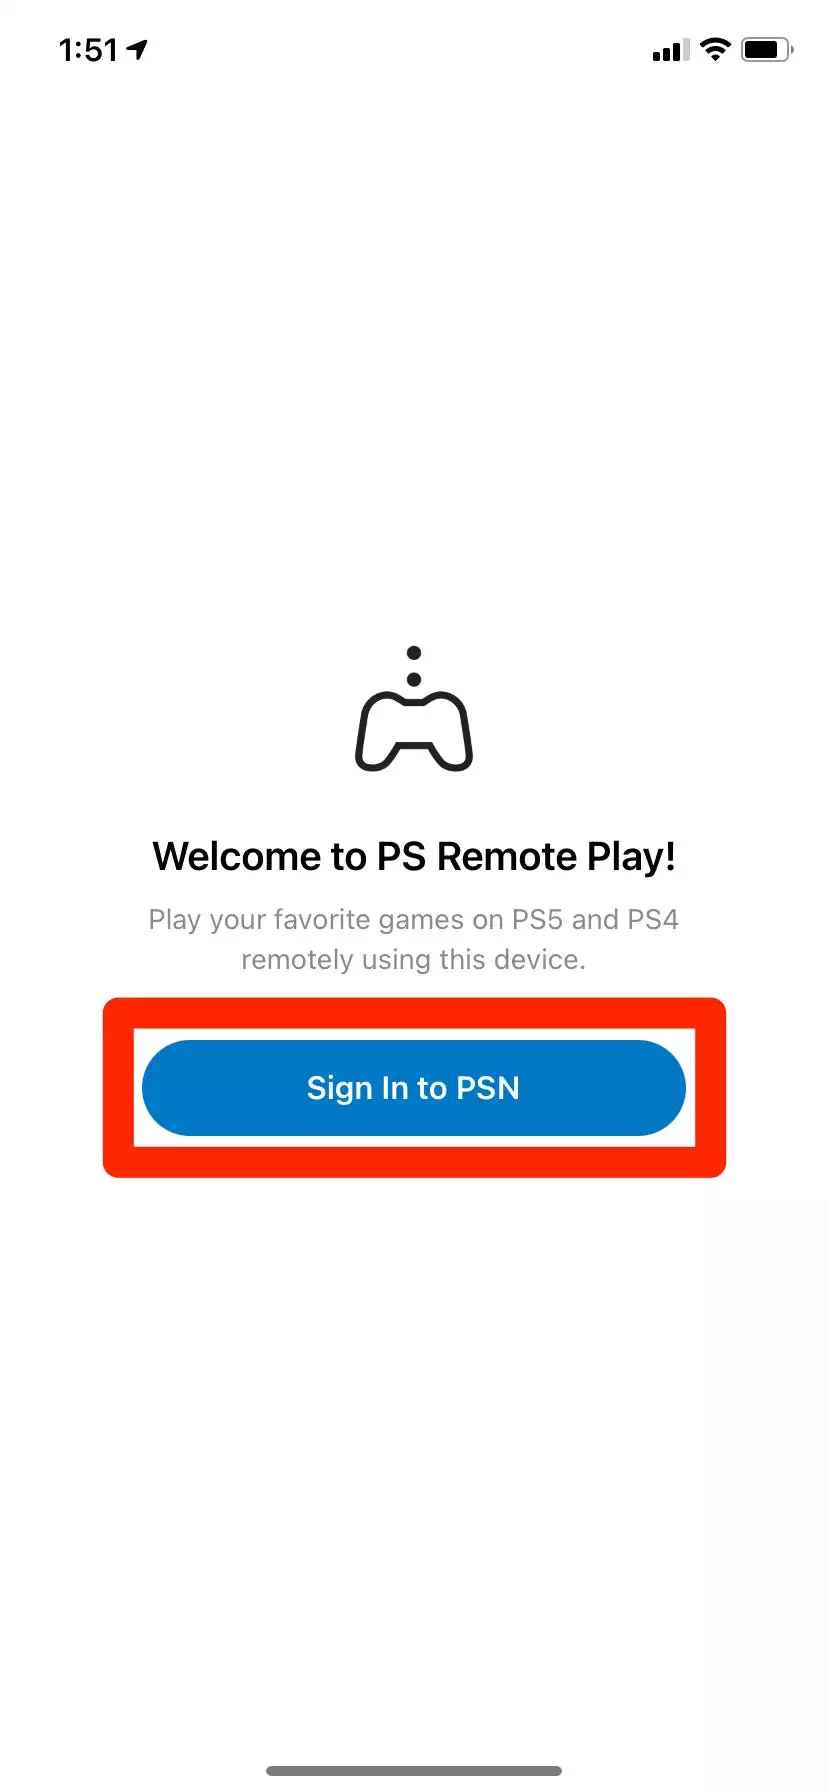 sign in to PSN account